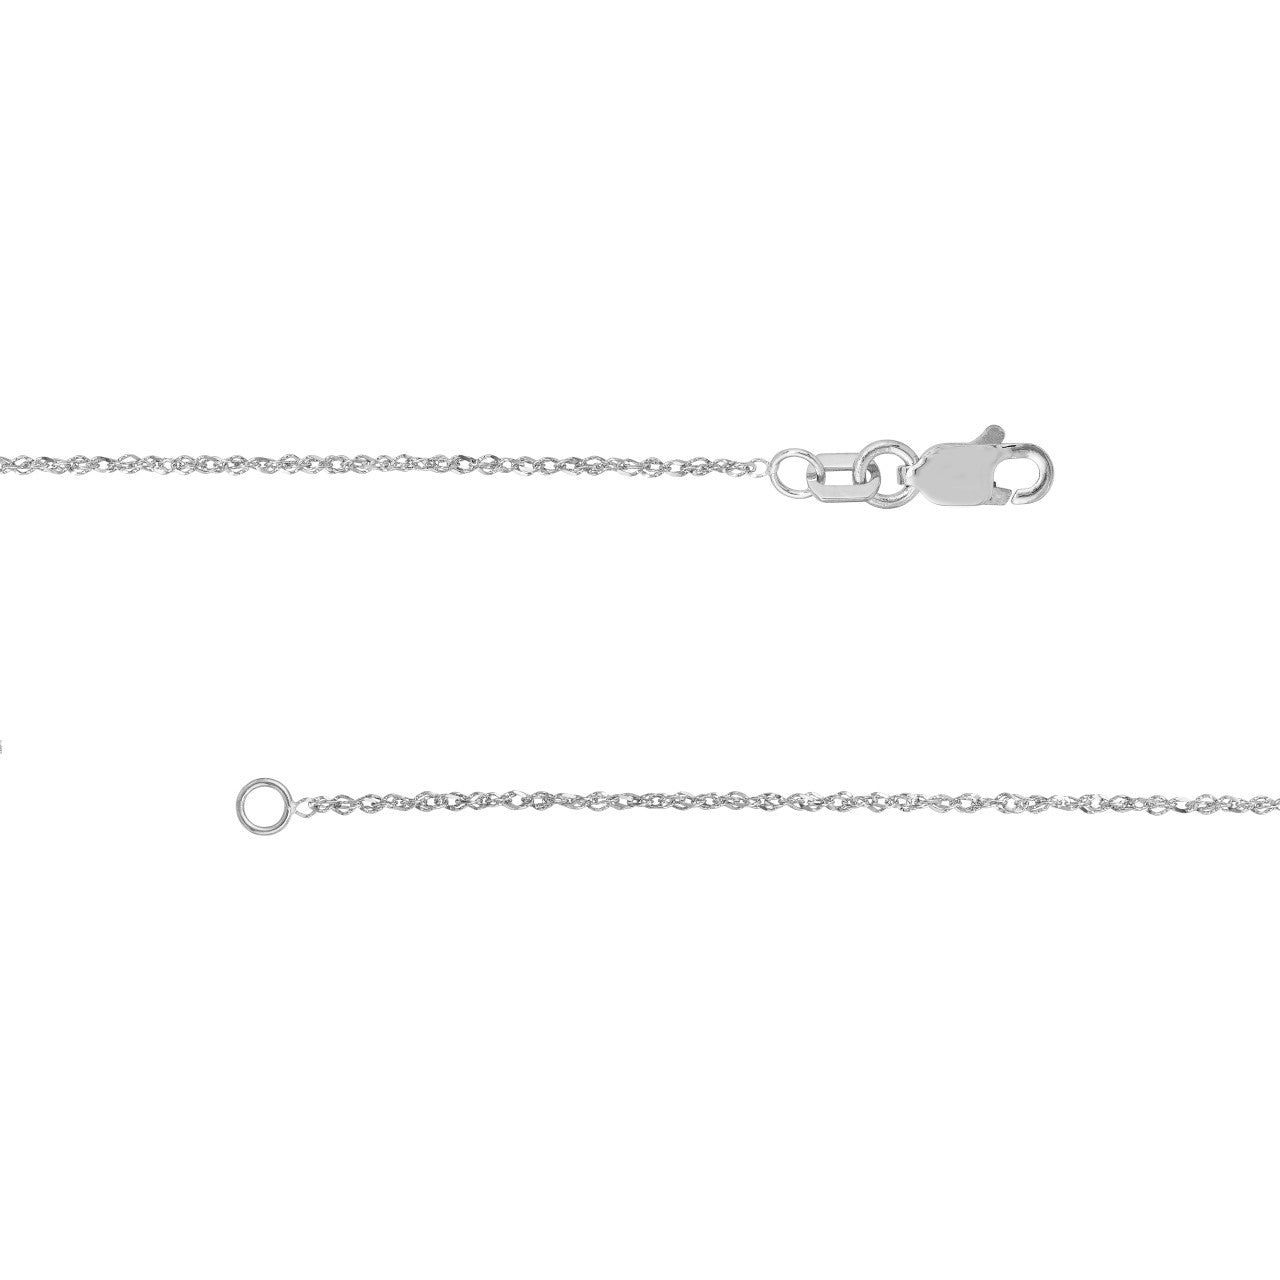 14k White Gold Singapore Chain with Lobster Lock